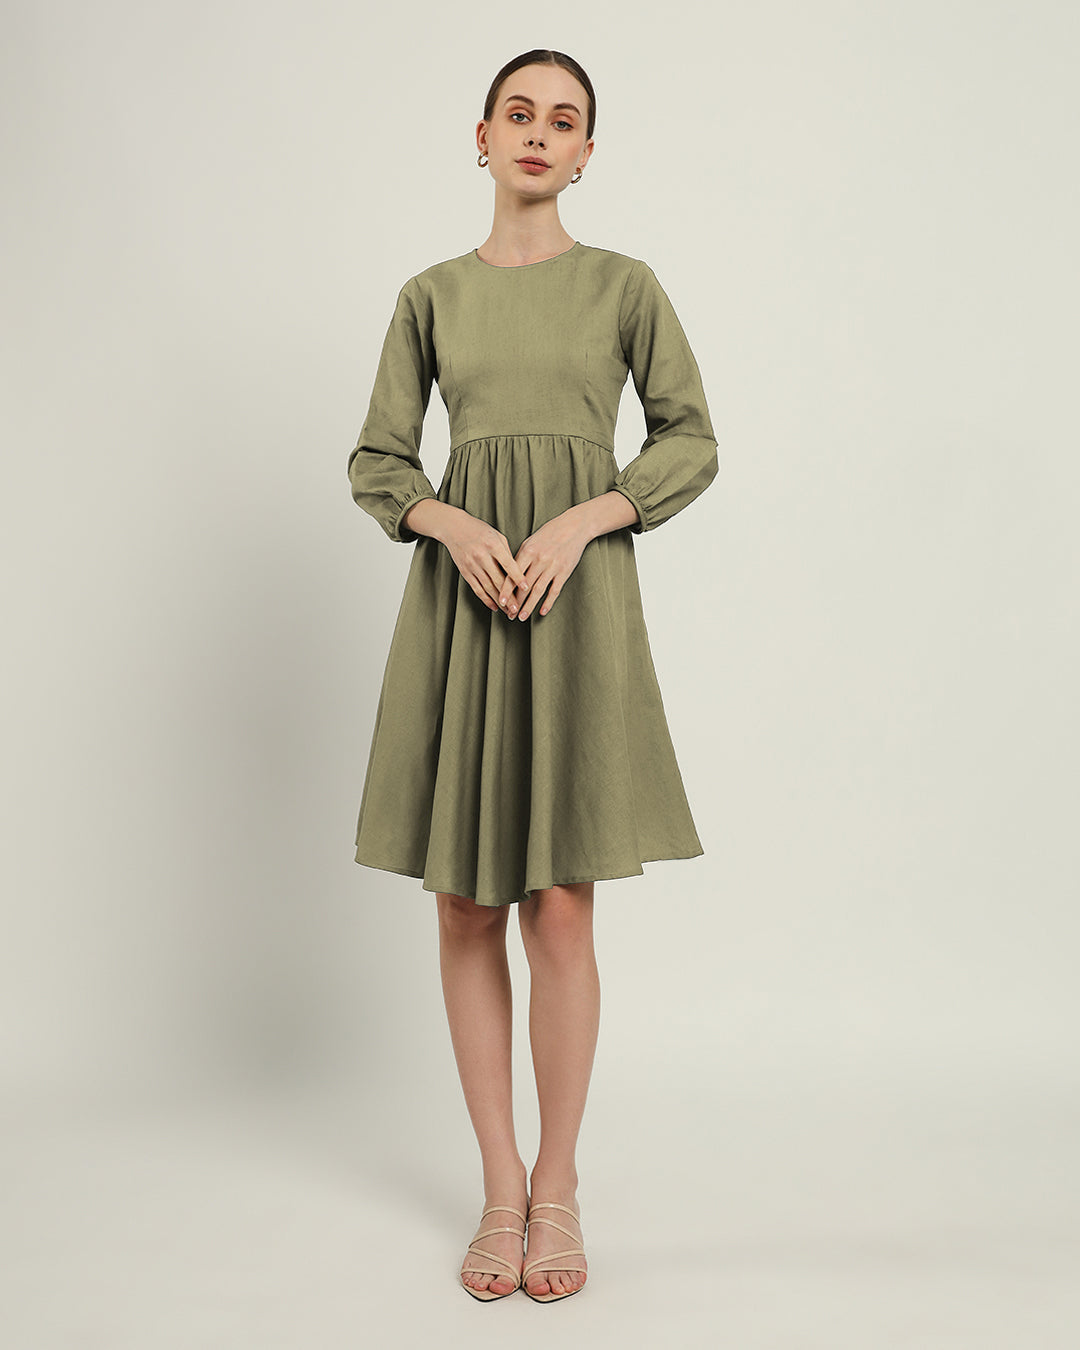 The Exeter Daisy Olive Linen Dress